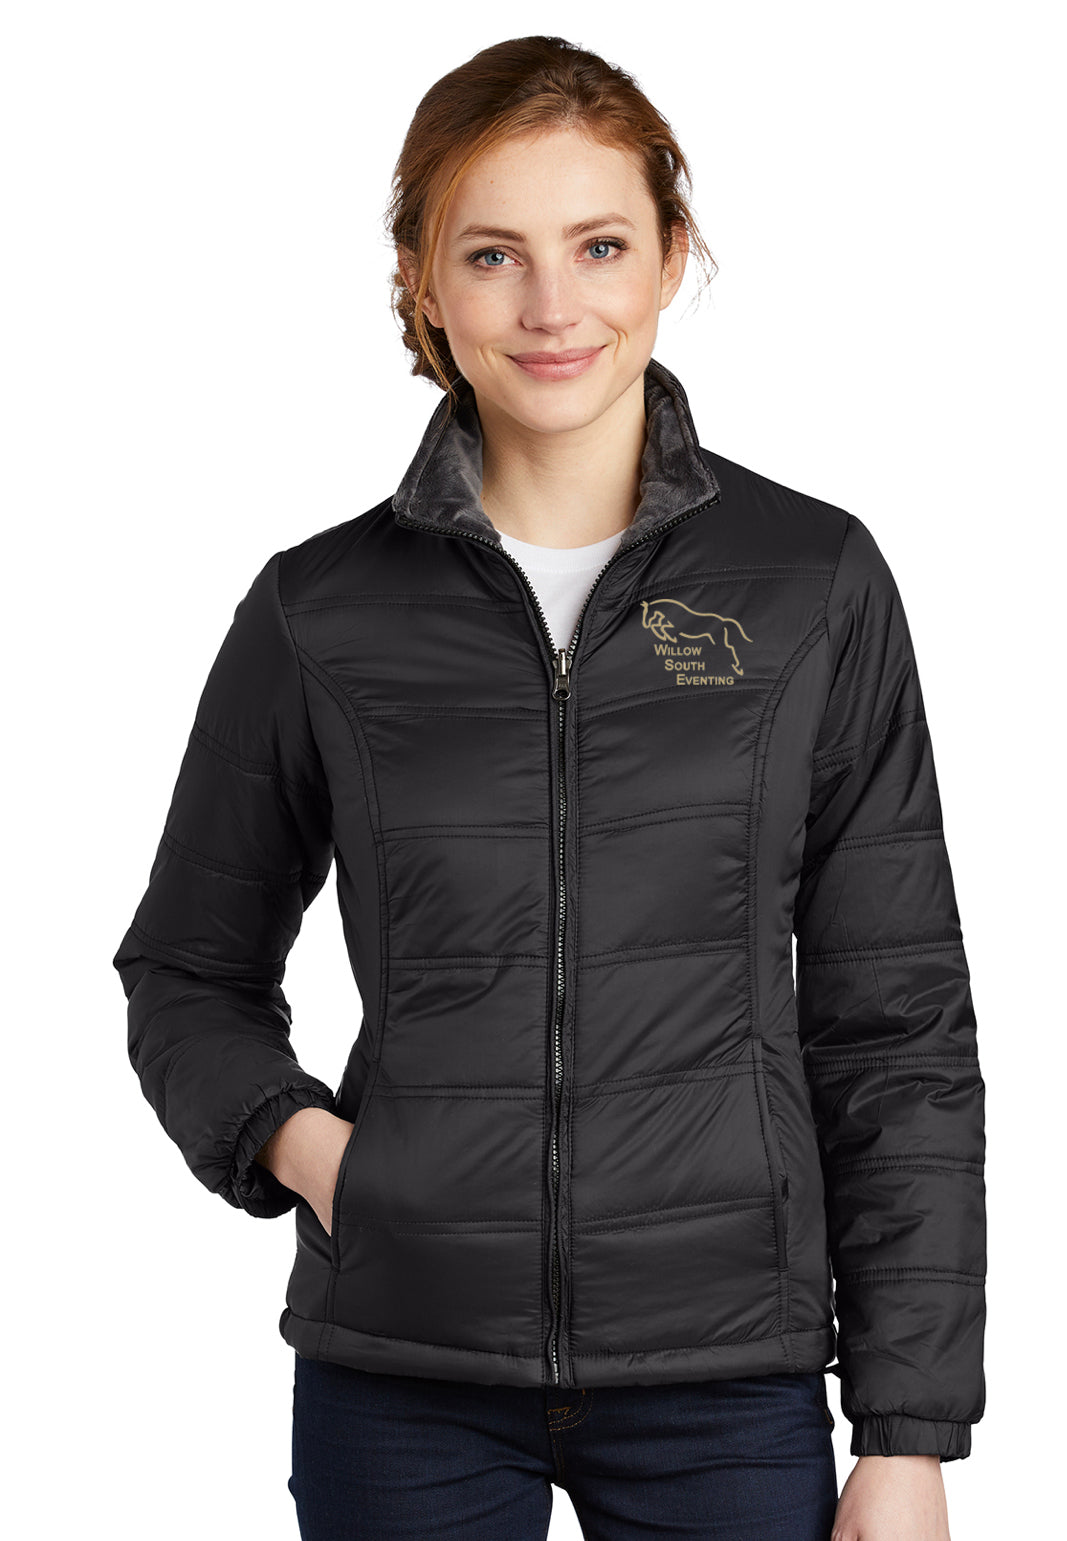 Willow South Eventing Port Authority® Ladies Colorblock 3-in-1 Jacket